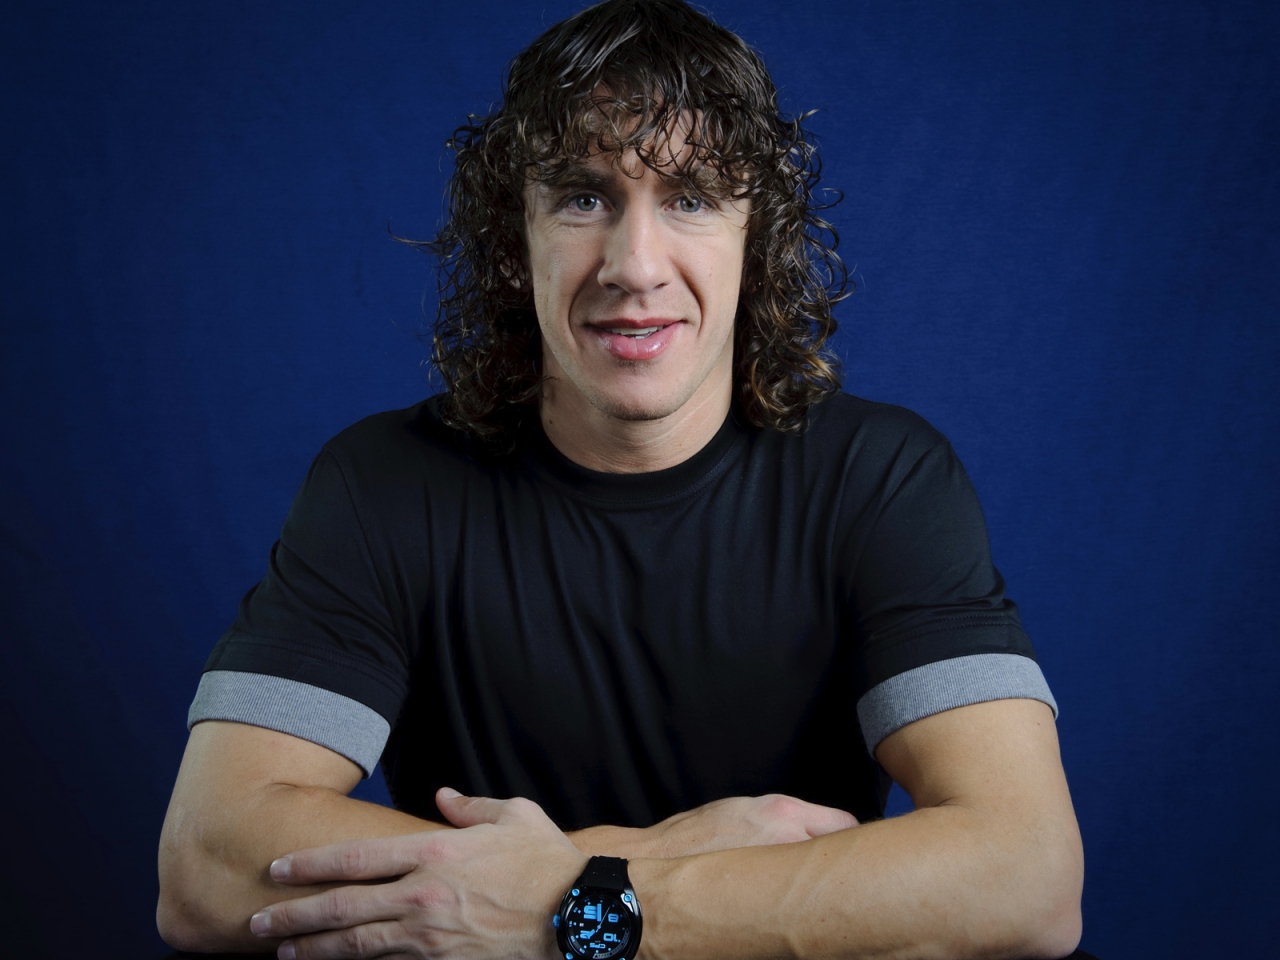 Carles Puyol Smile for 1280 x 960 resolution